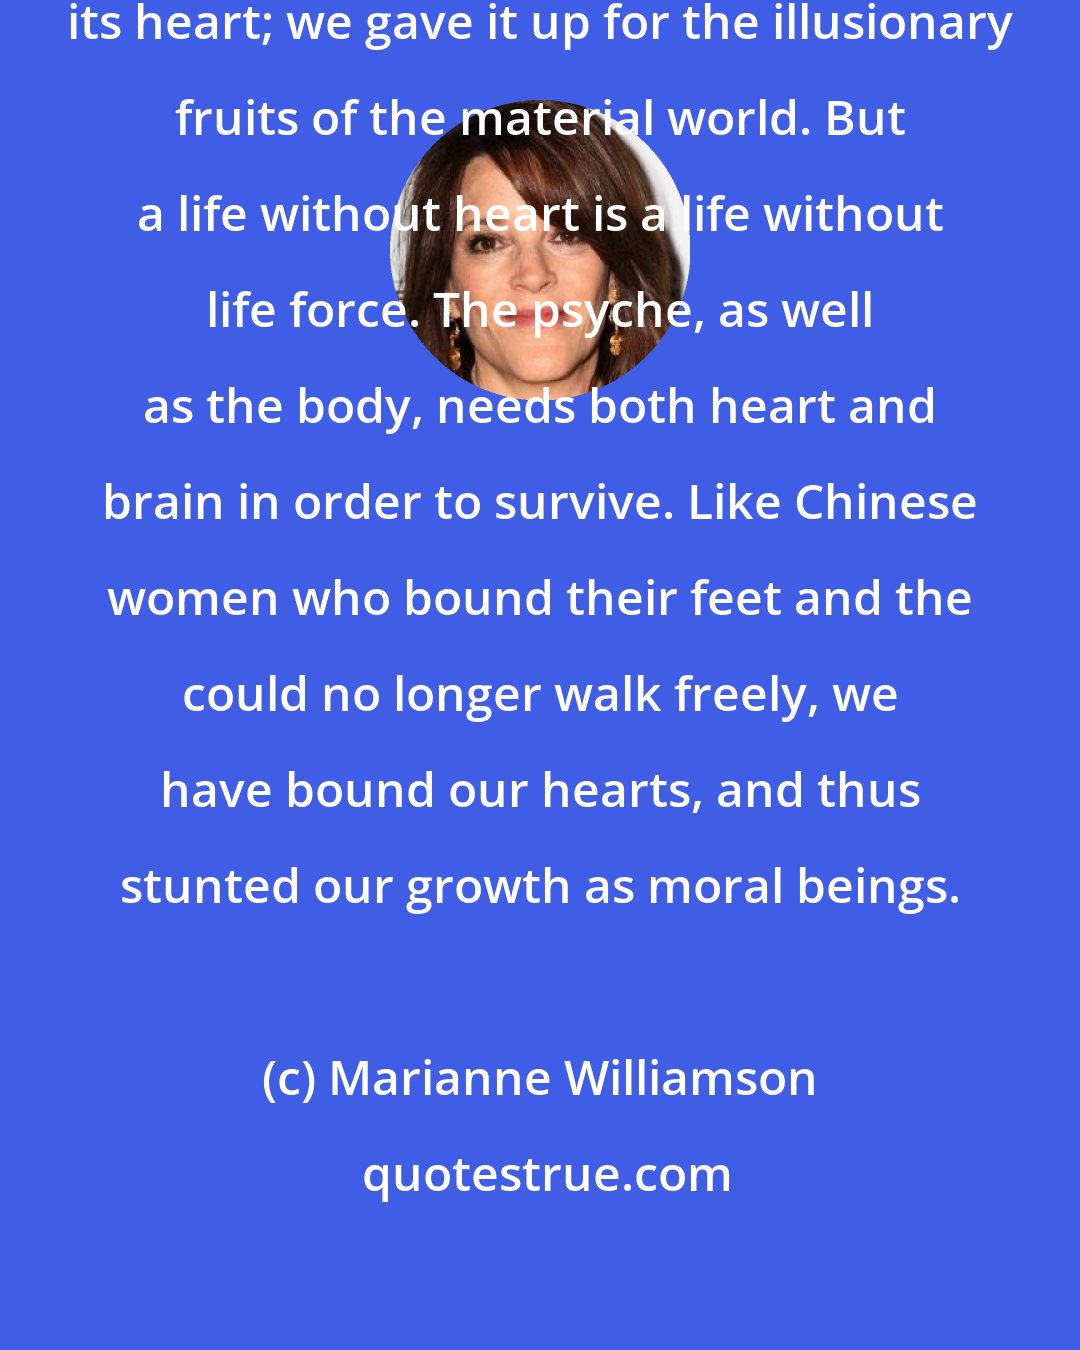 Marianne Williamson: The human species has all but lost its heart; we gave it up for the illusionary fruits of the material world. But a life without heart is a life without life force. The psyche, as well as the body, needs both heart and brain in order to survive. Like Chinese women who bound their feet and the could no longer walk freely, we have bound our hearts, and thus stunted our growth as moral beings.